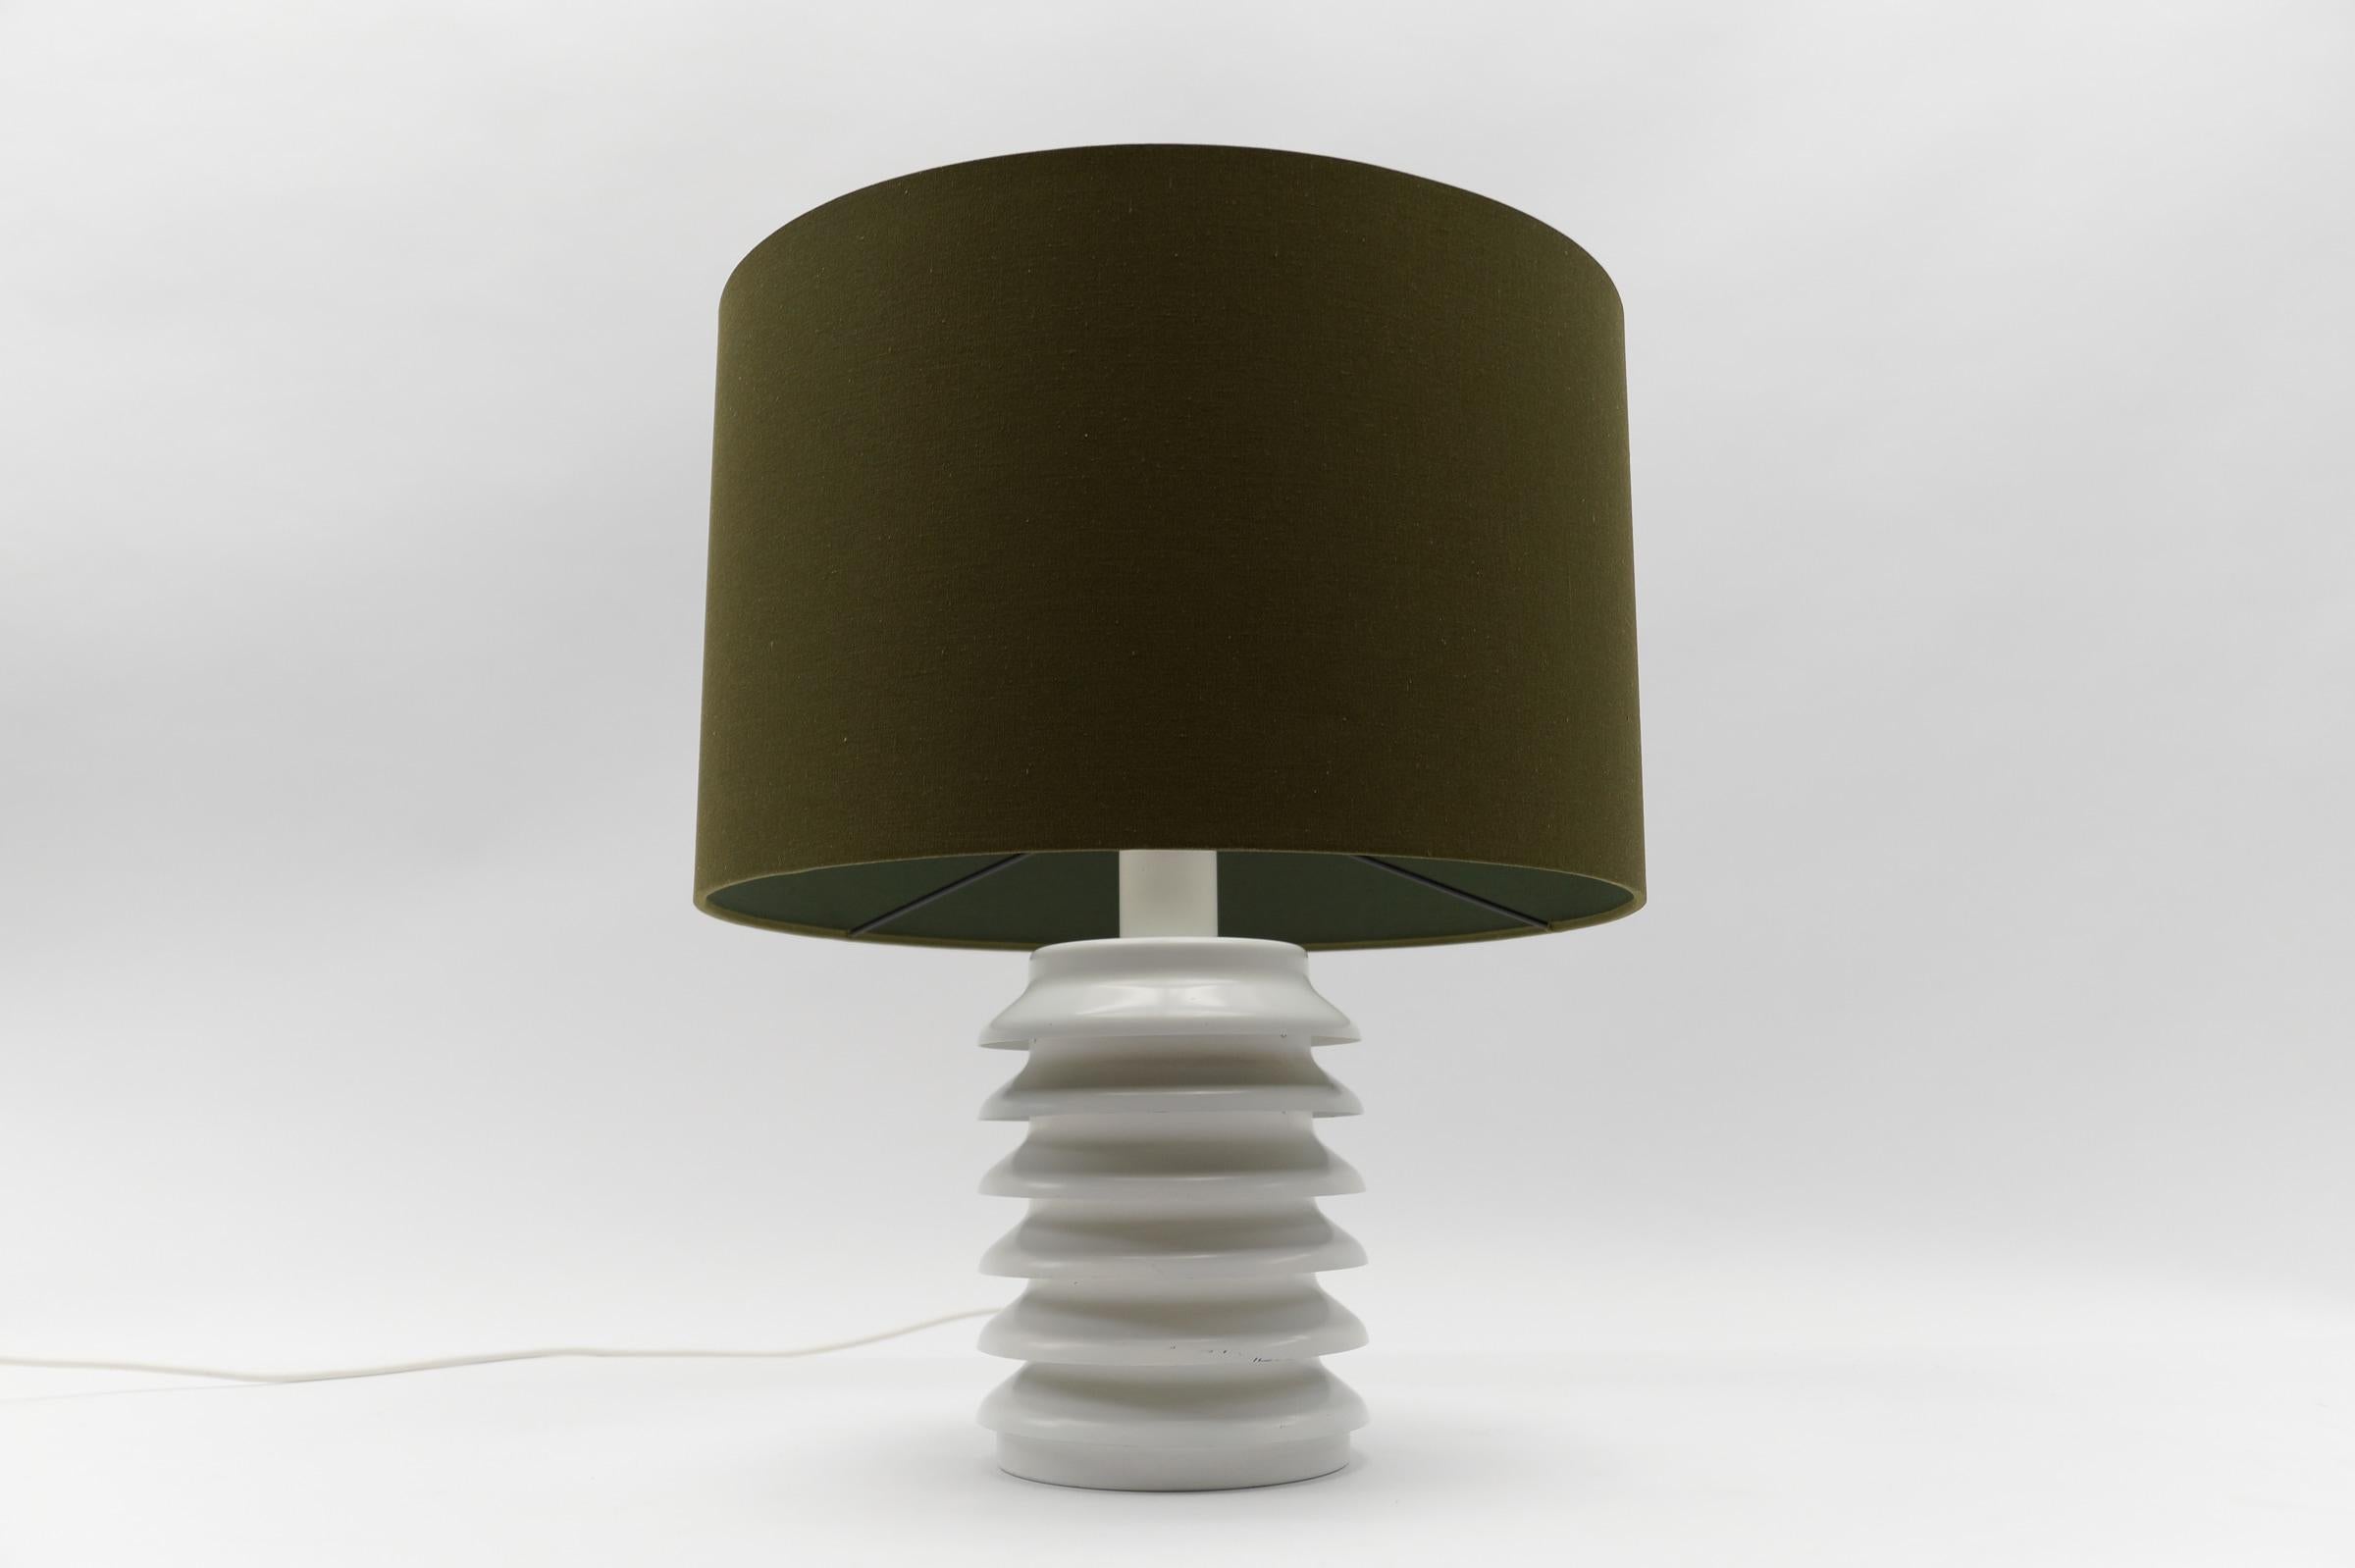 Mid Century Modern Metal Table Lamp Base with Illuminated Base by Kaiser Leuchten, 1960s Germany

The lampshade is to illustrate how the lamp base looks with a shade. The shade has a diameter of 17.71 in. (45 cm) and height 11.41 in. (29 cm).

The